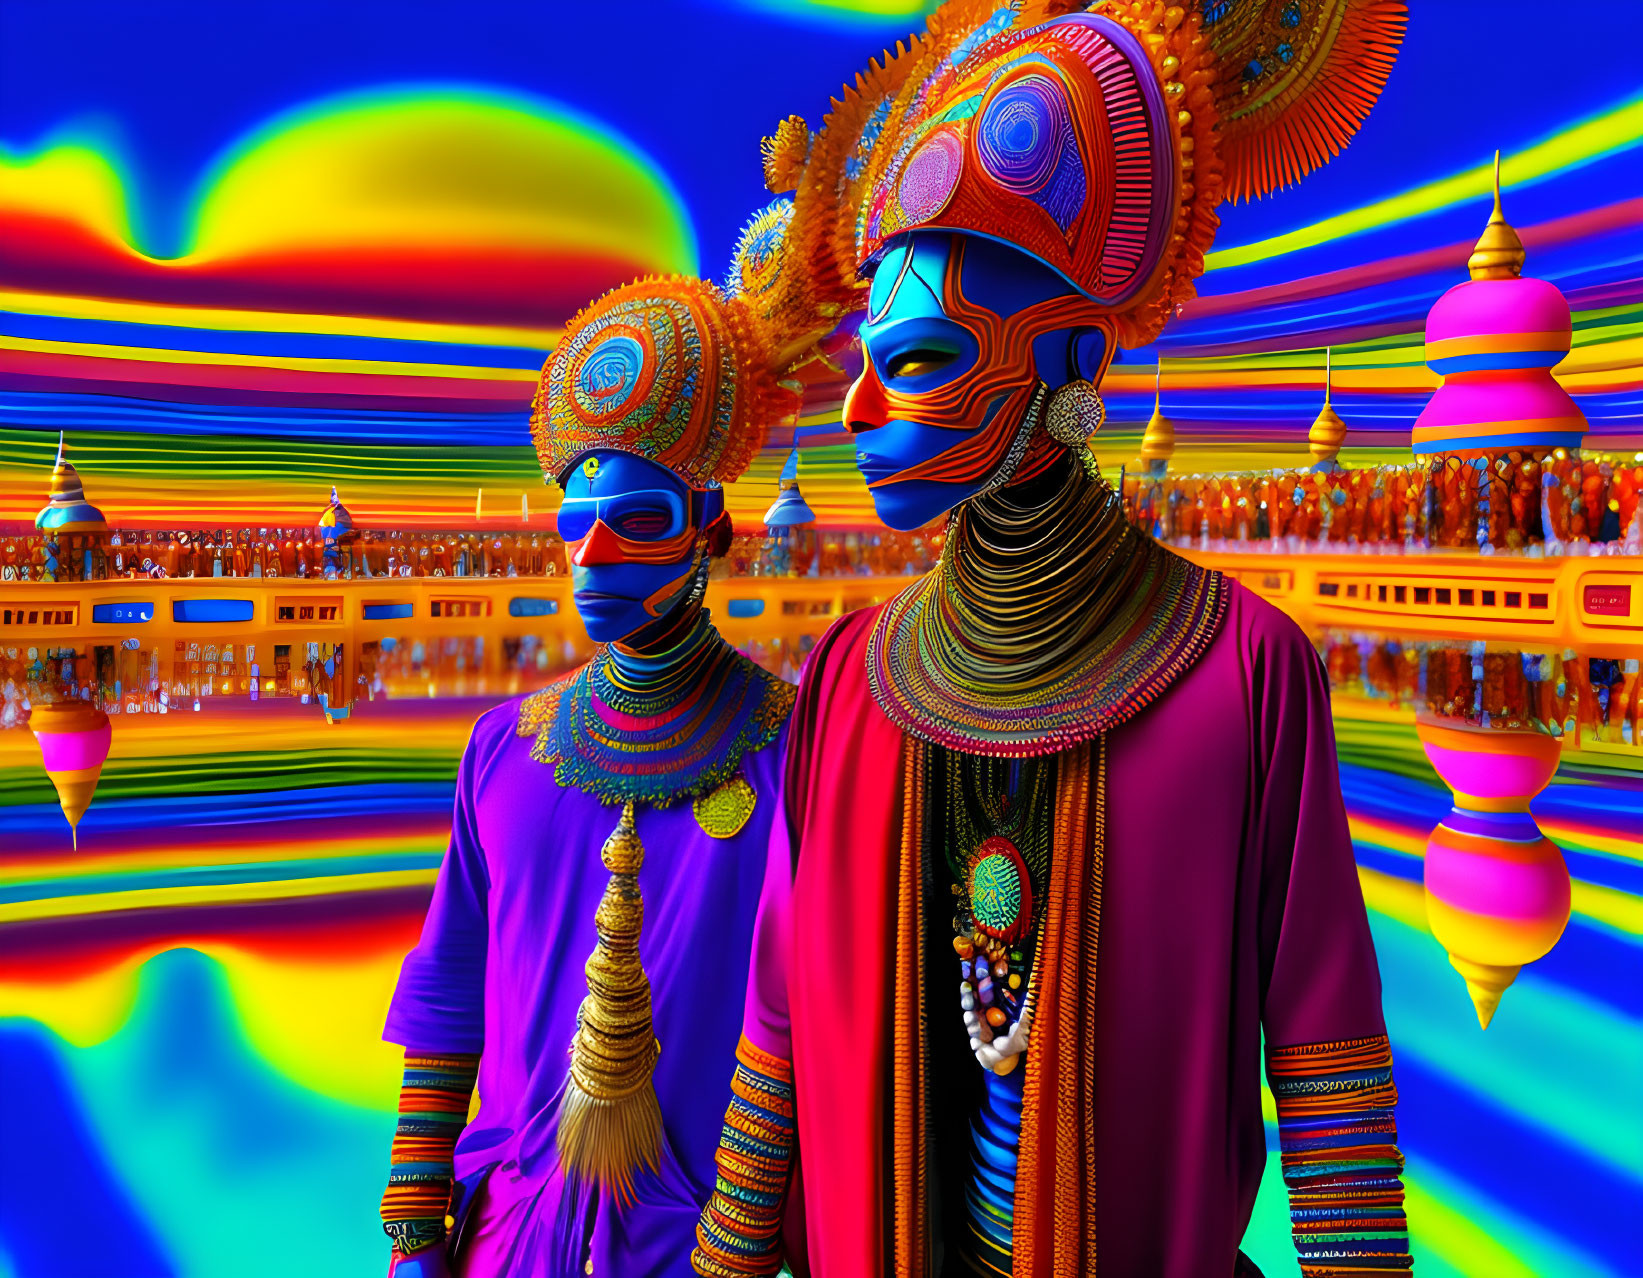 Vibrant surreal figures in colorful attire on psychedelic background